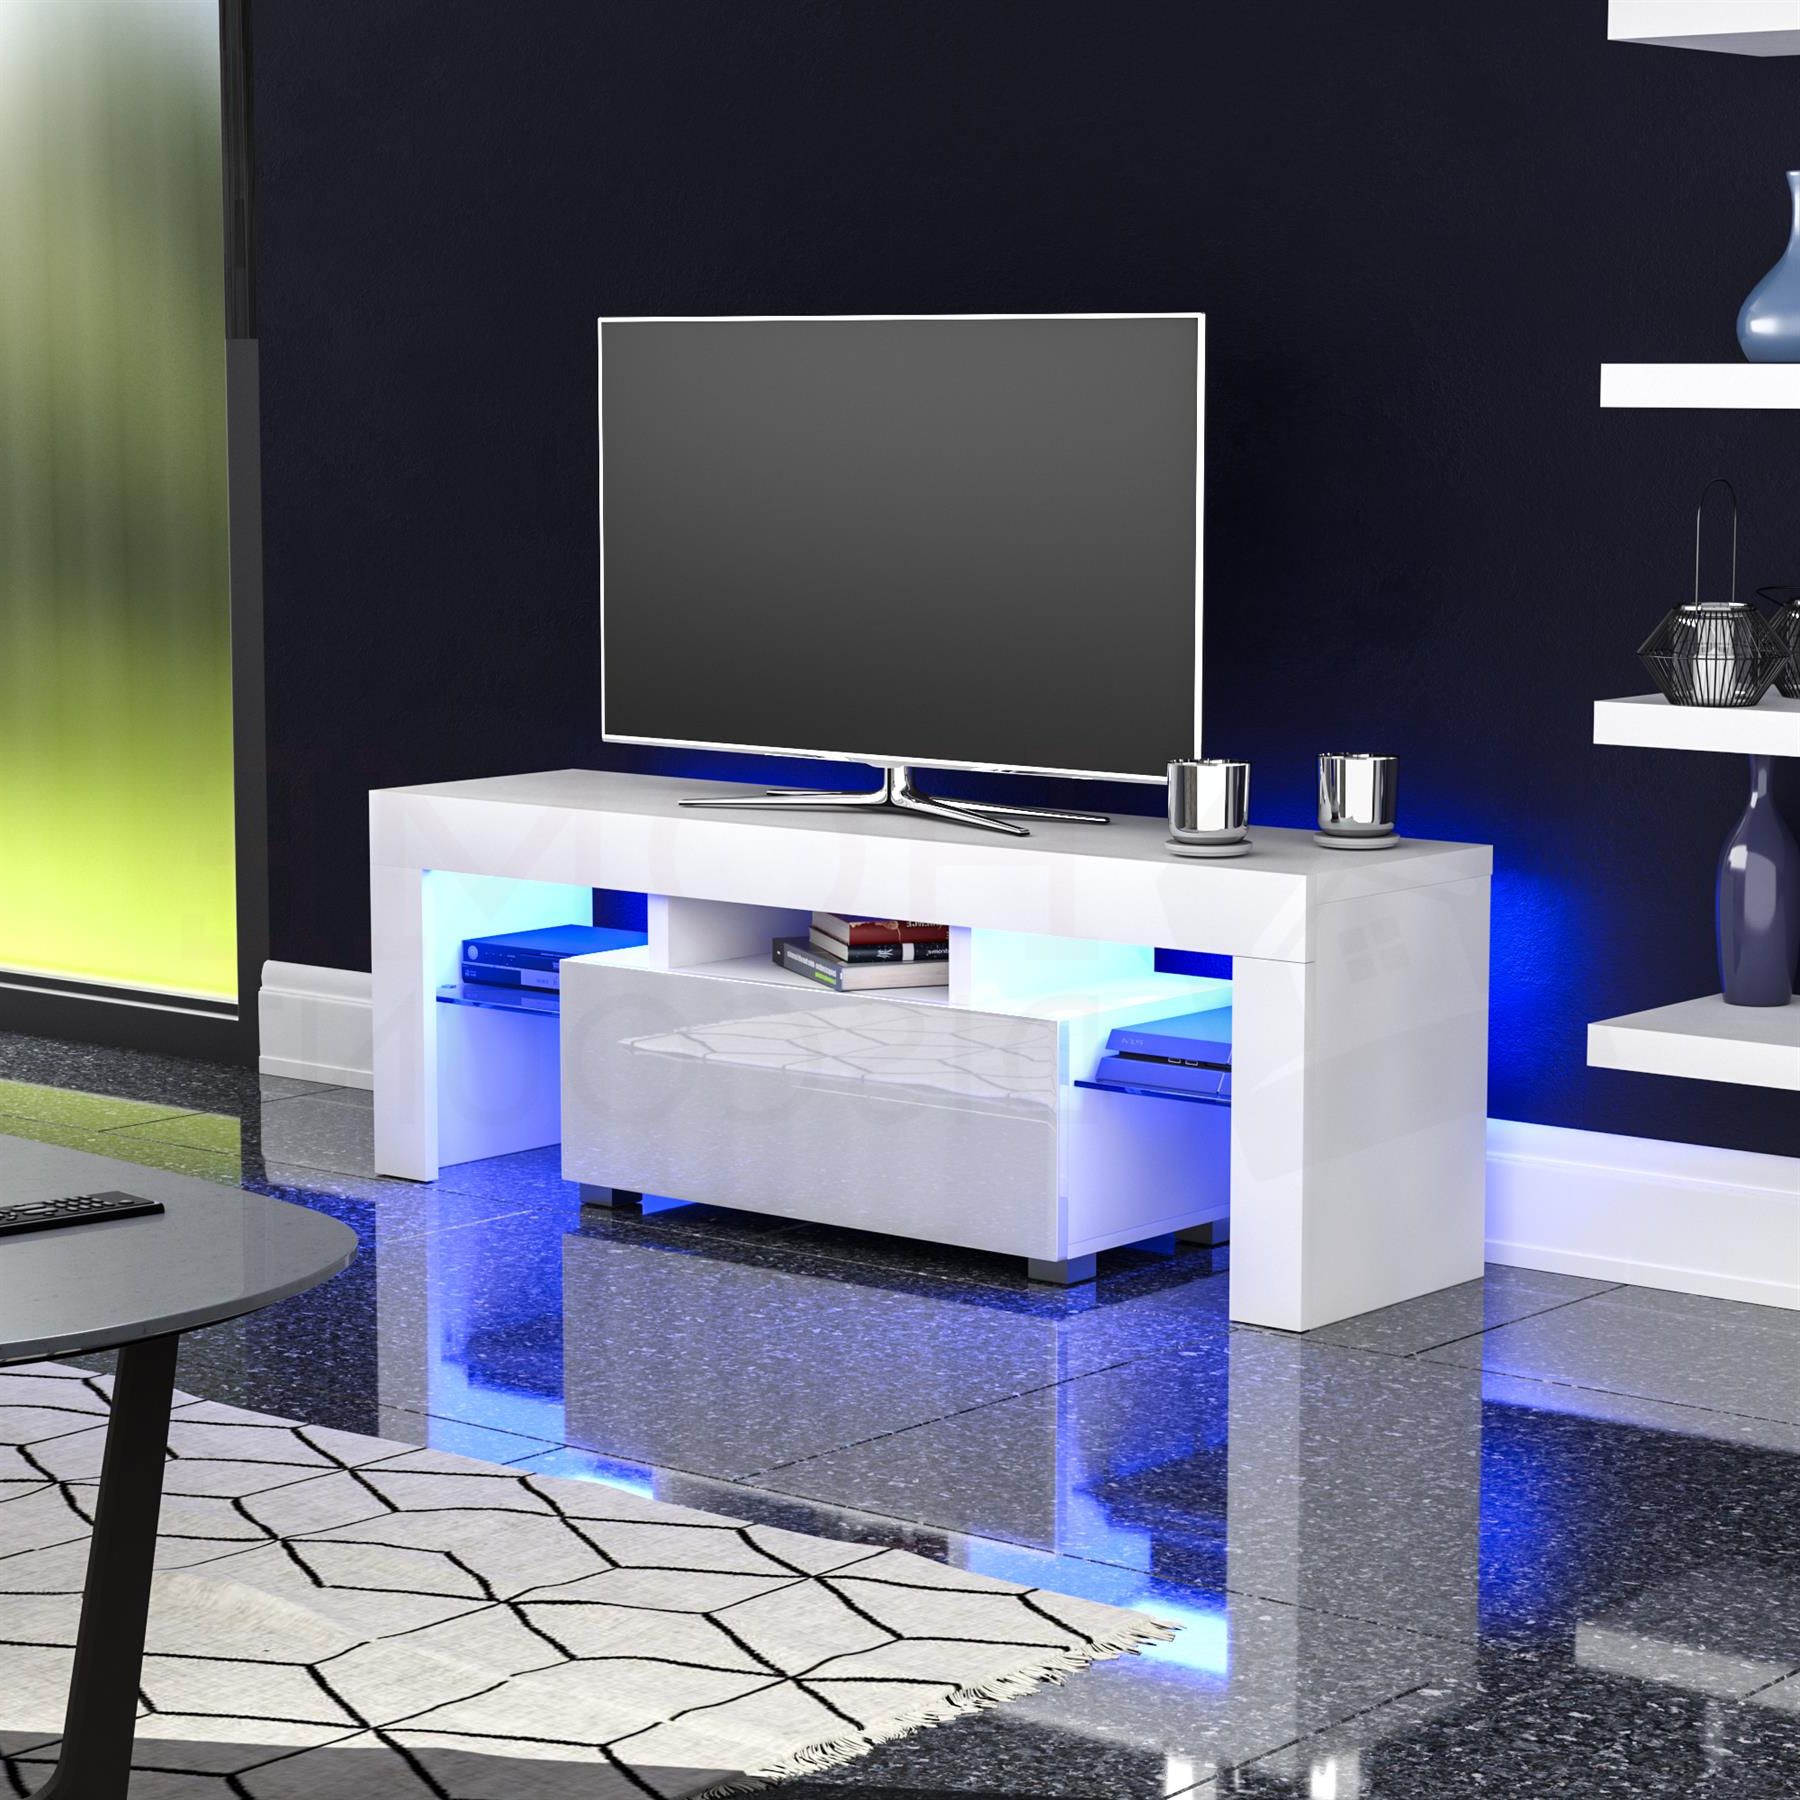 Luna Led Tv Stand Cabinet Unit 1 Drawer Modern Regarding Zimtown Modern Tv Stands High Gloss Media Console Cabinet With Led Shelf And Drawers (Gallery 3 of 20)